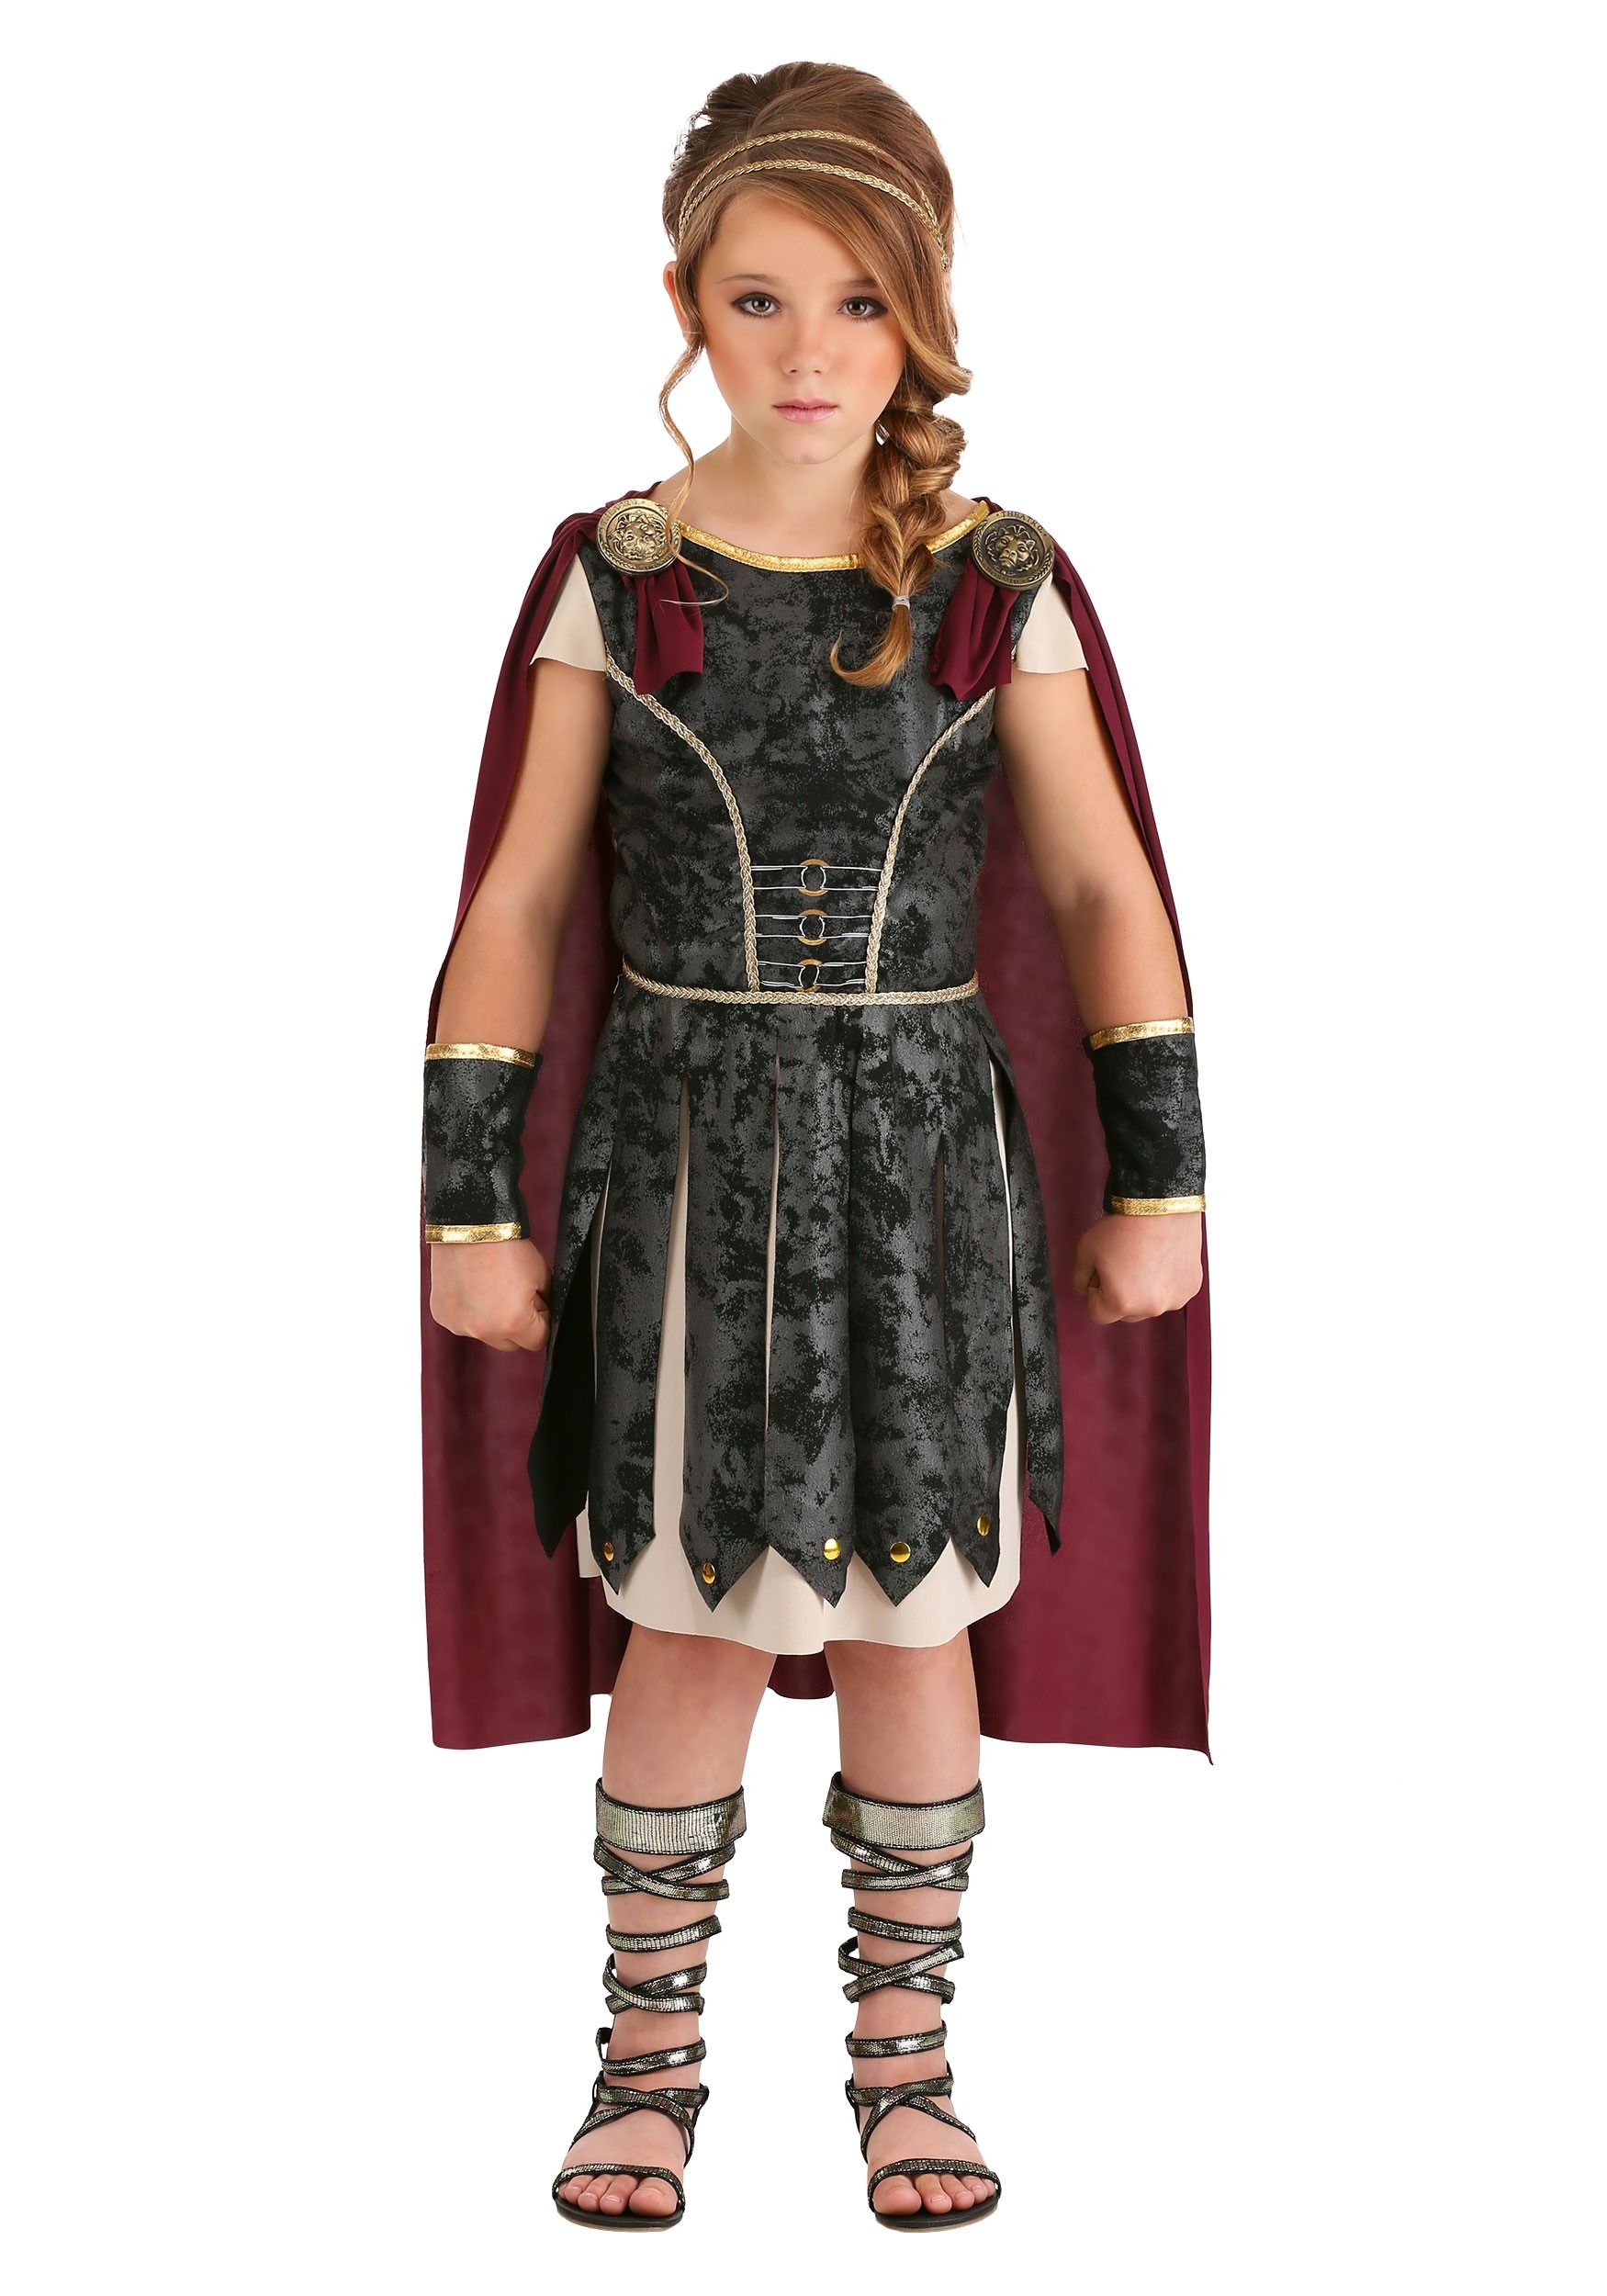 Photos - Fancy Dress California Costume Collection Fearless Gladiator Girls Costume Red/Bro 